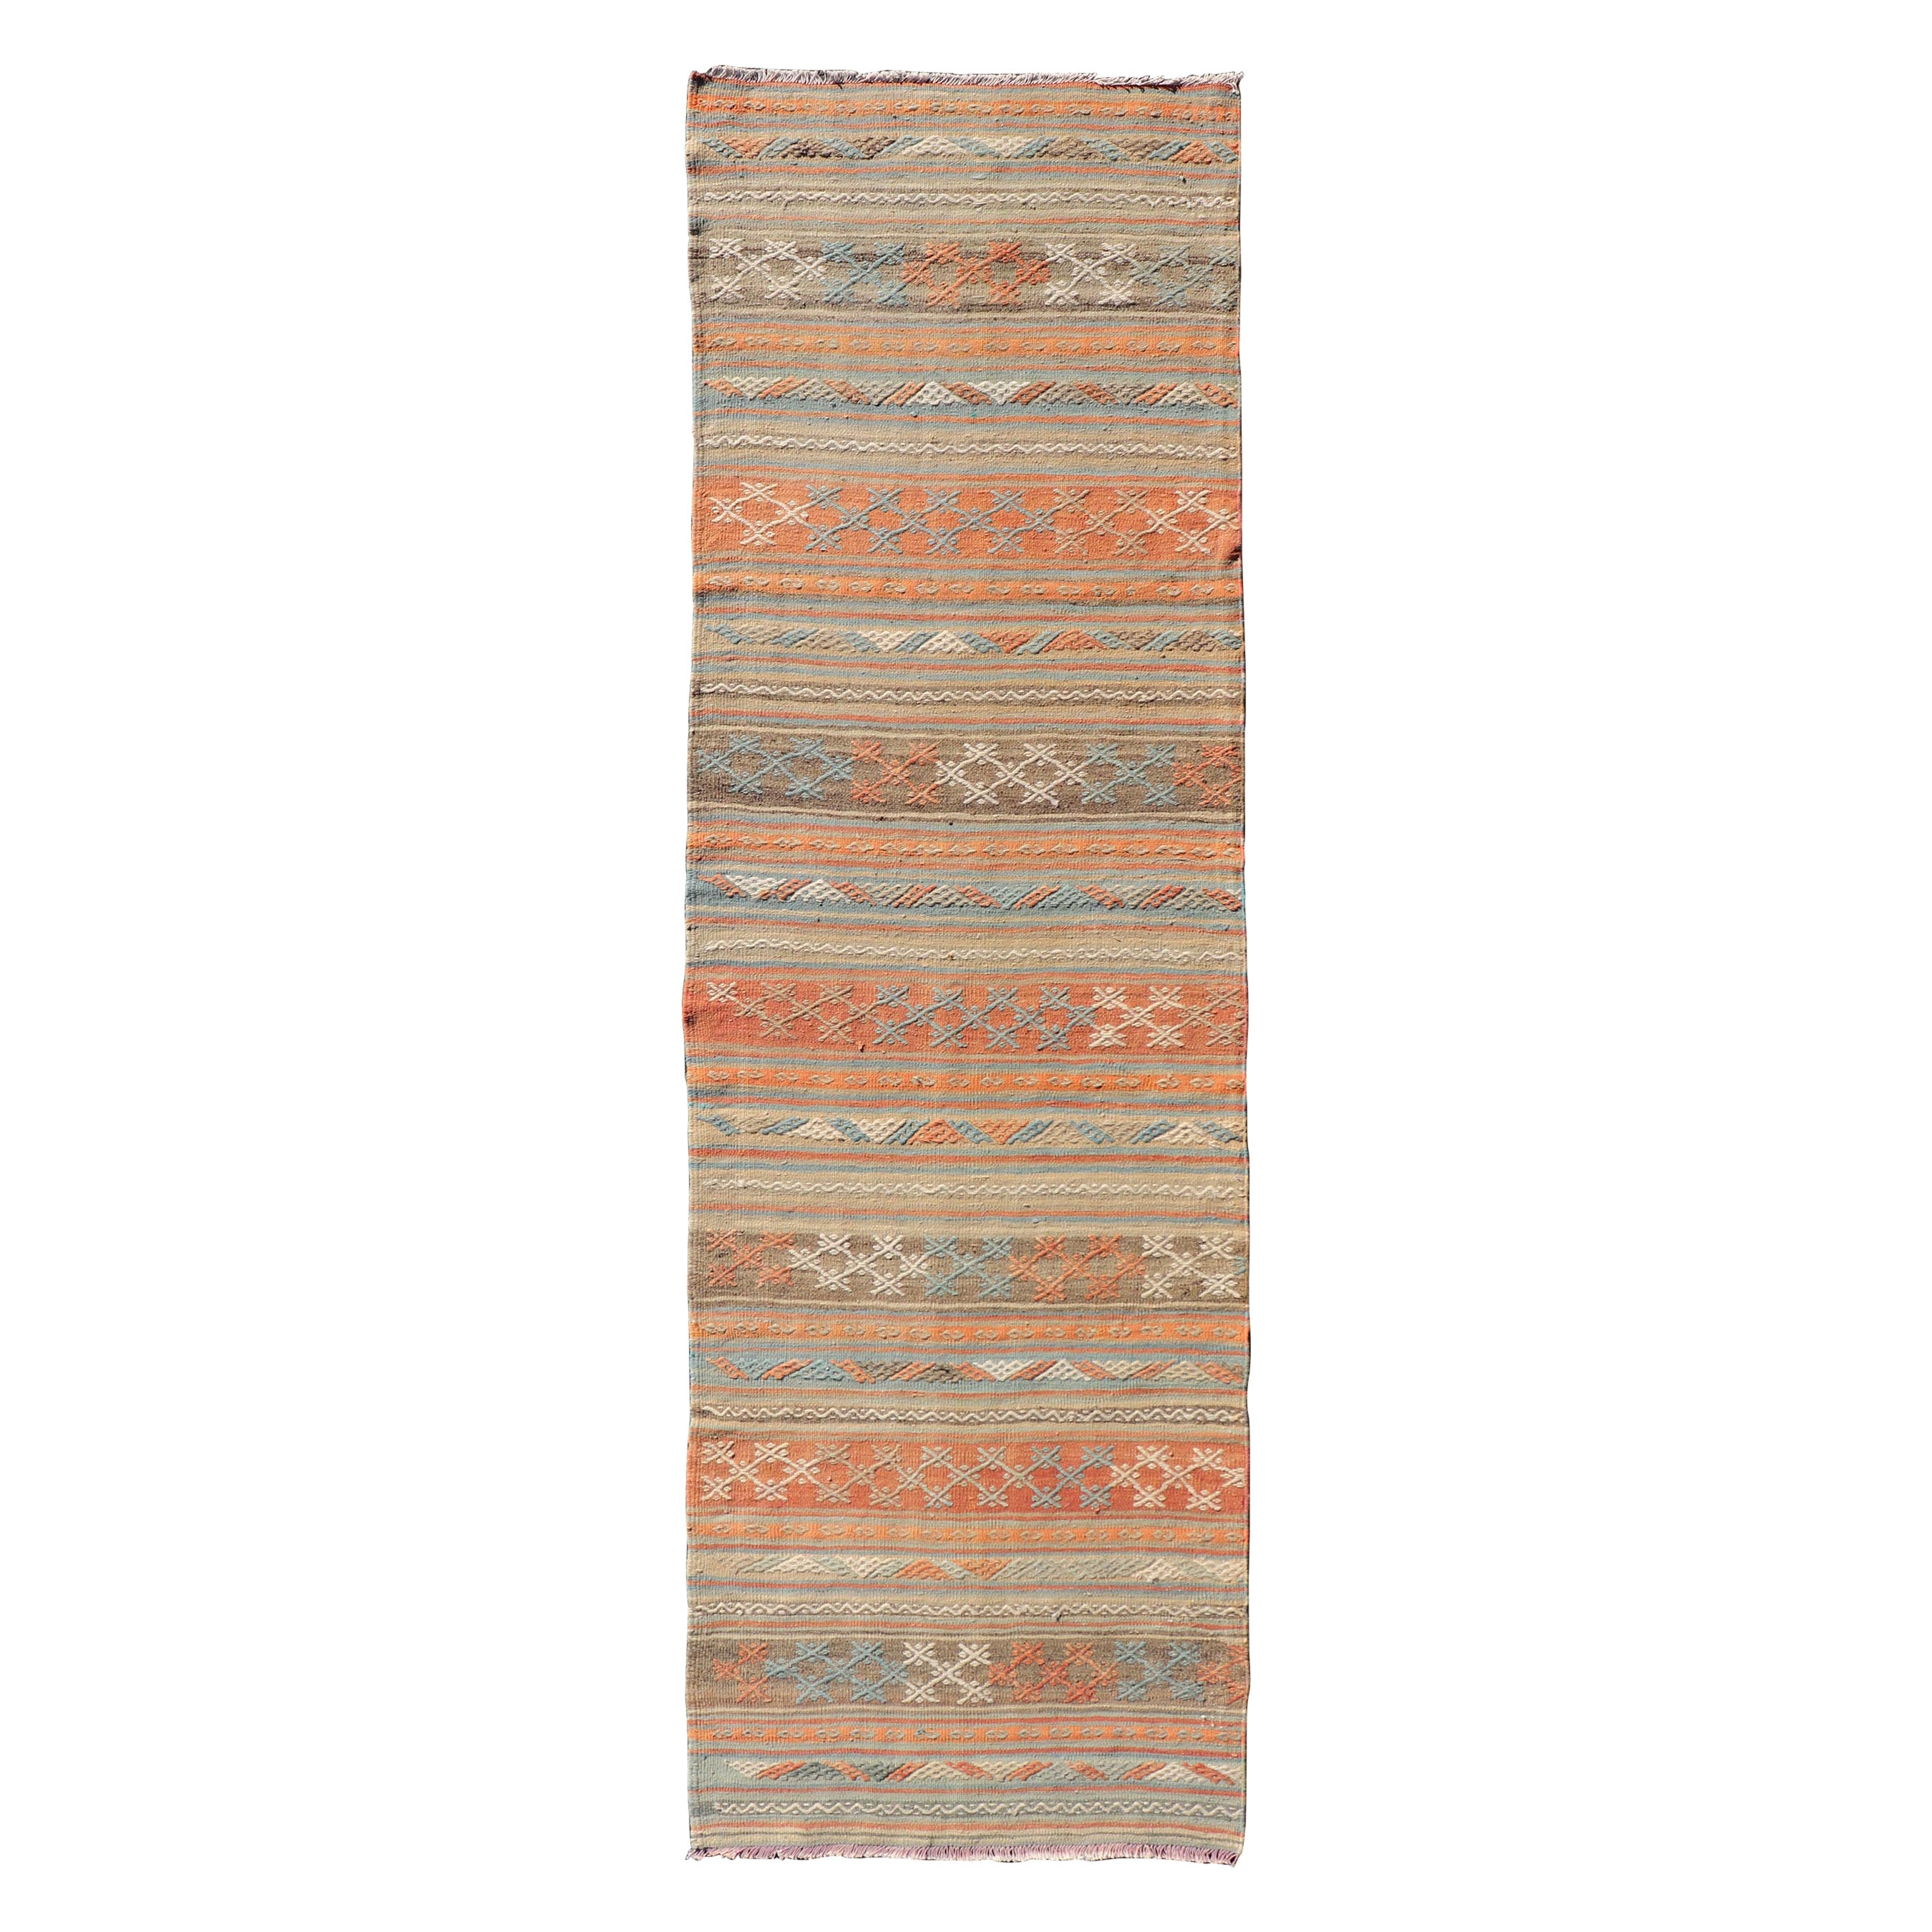 Turkish Vintage Kilim Runner with Horizontal Stripes in Bright Tones For Sale